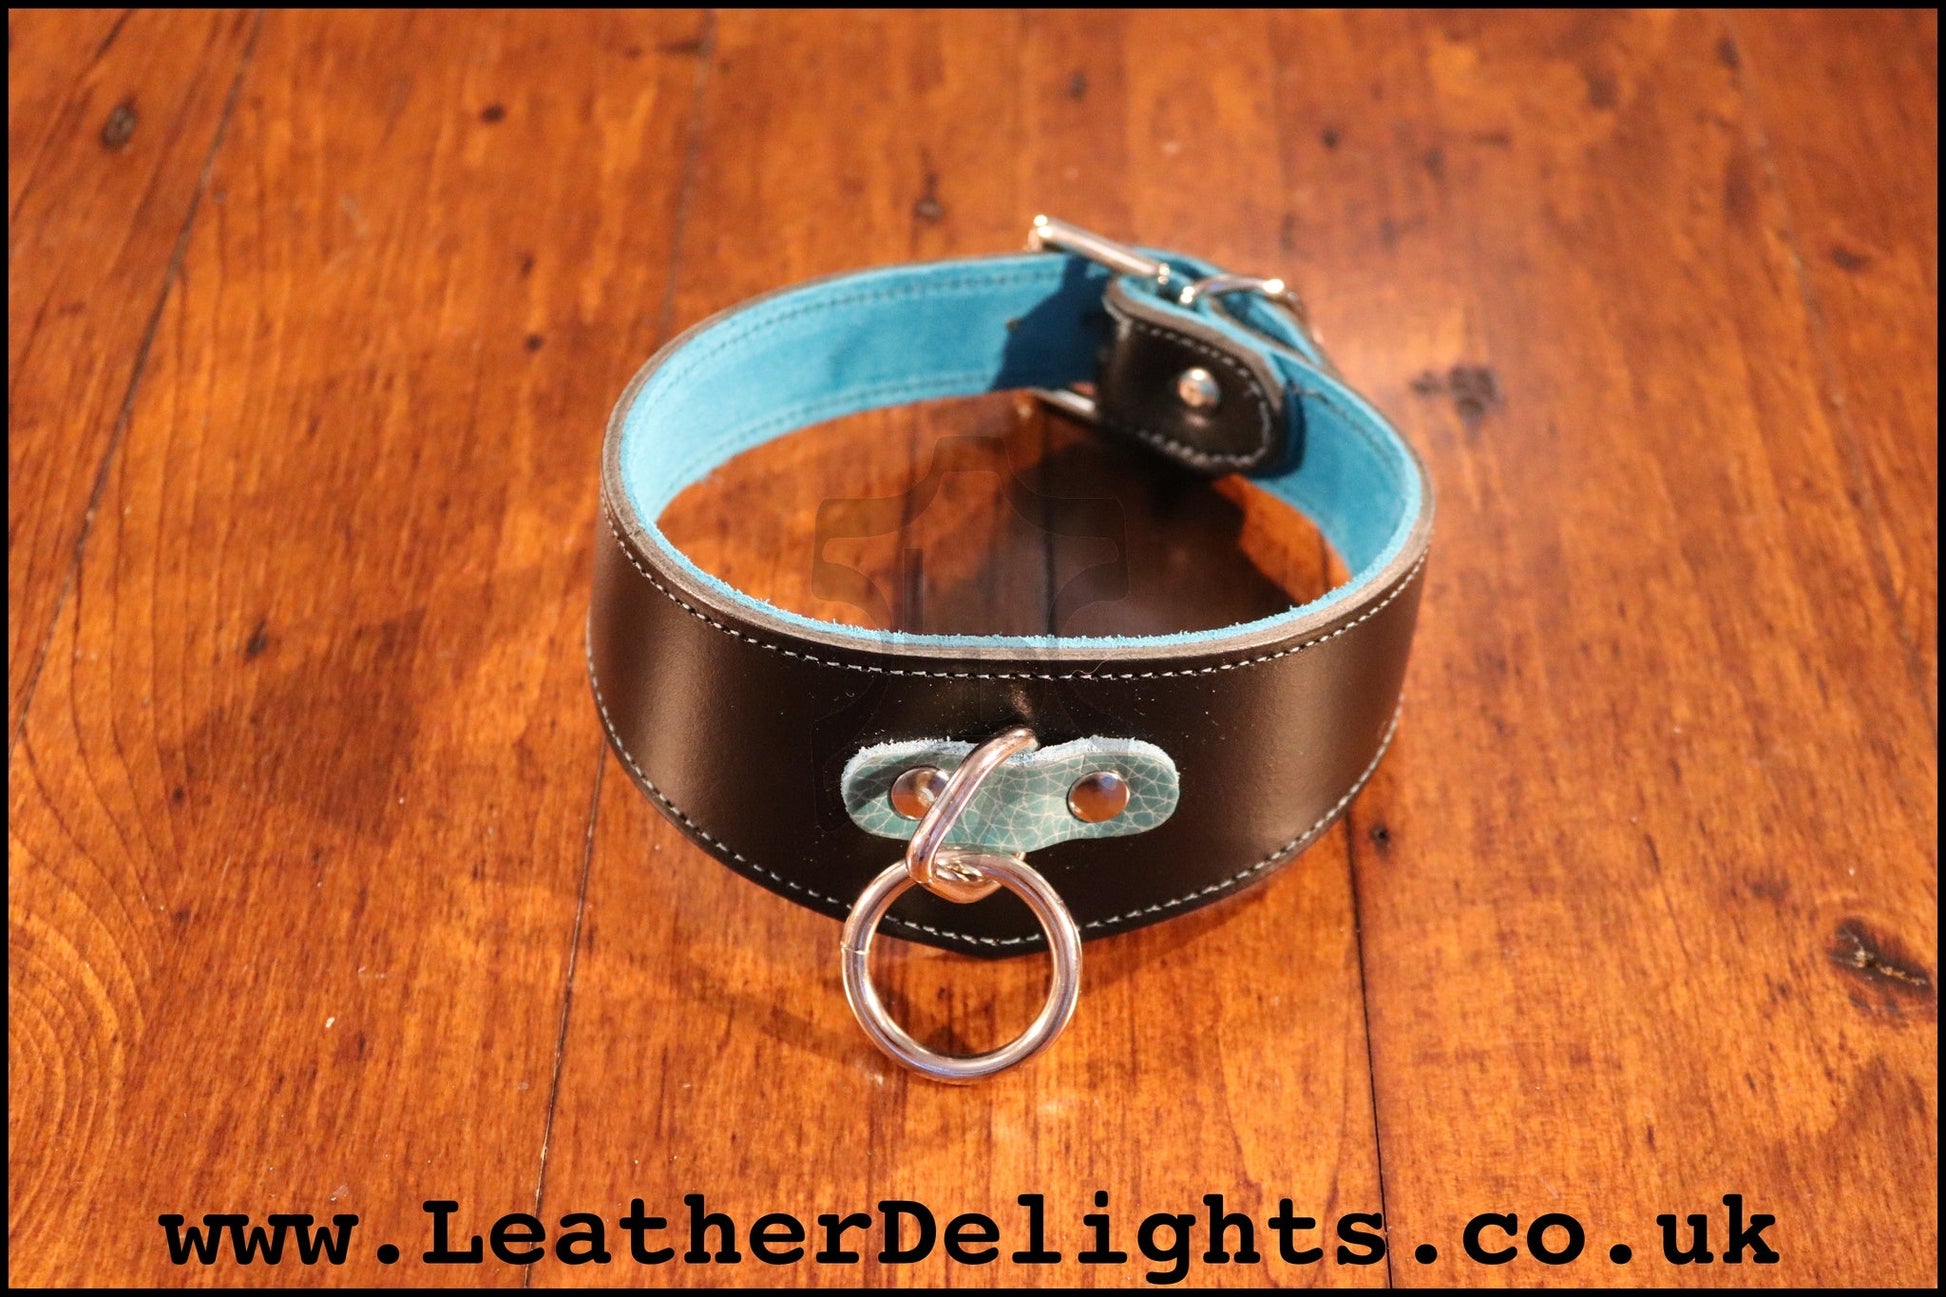 Simple Dress Collar - Leather Delights